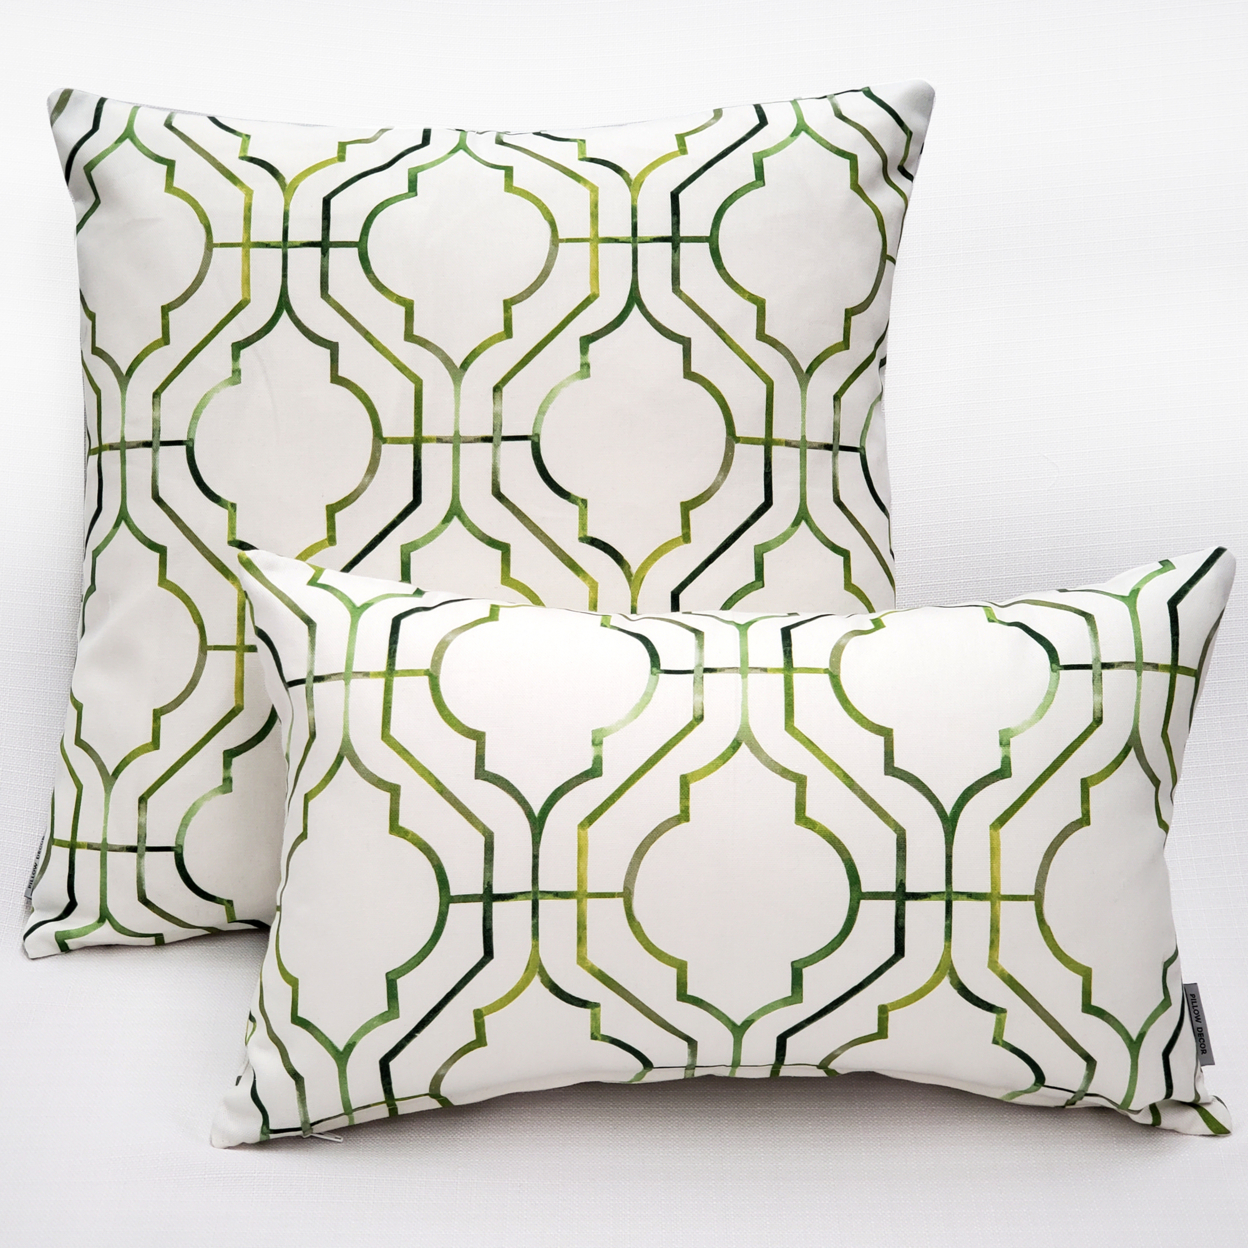 Biltmore Gate Green Throw Pillow 20x20 Inches Square, Complete Pillow With Polyfill Pillow Insert